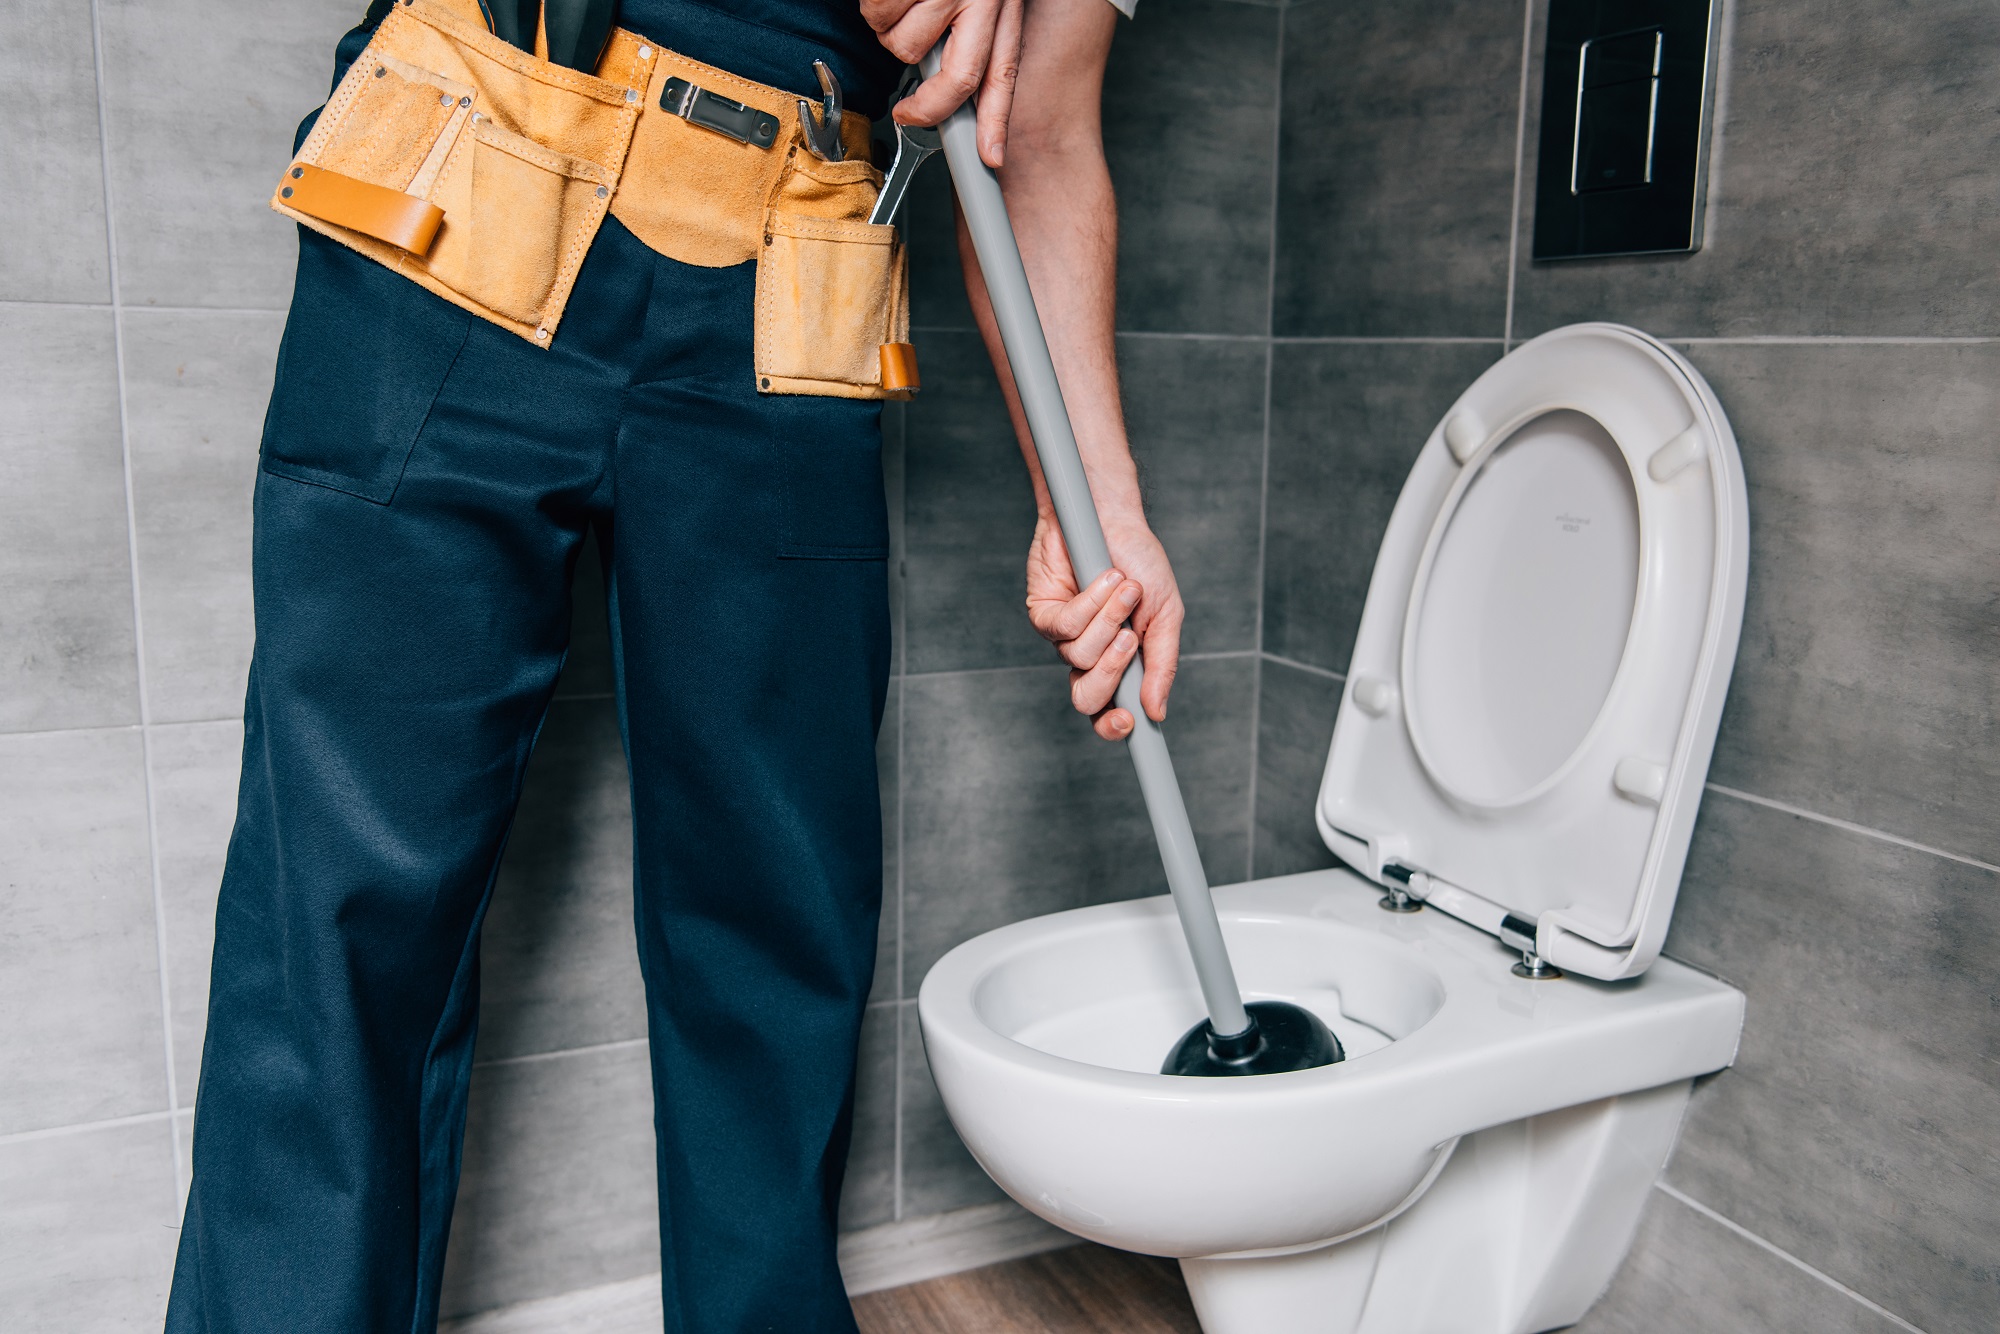 Why Should I Call a Professional to Fix My Clogged Toilet